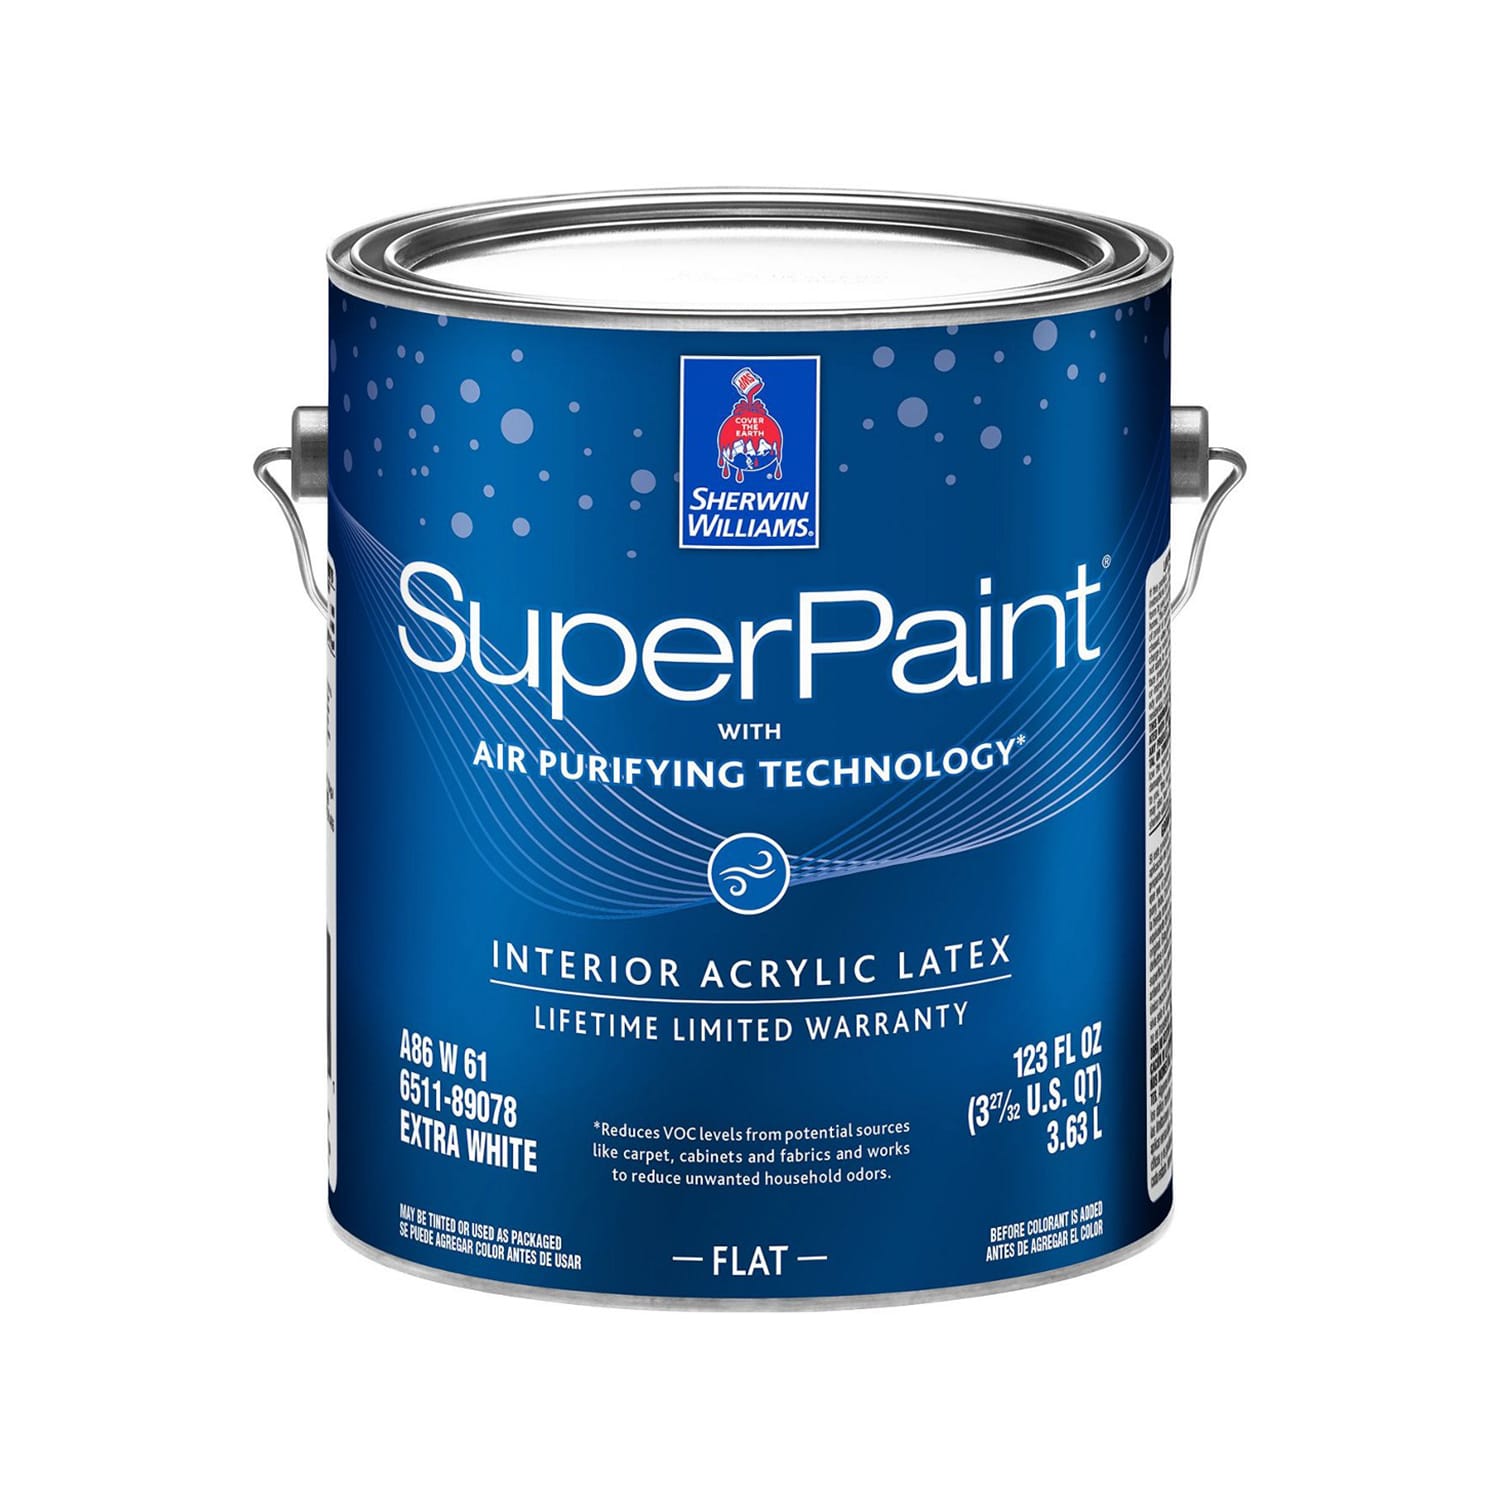 9 Nontoxic Paint Brands to Transform Your Space